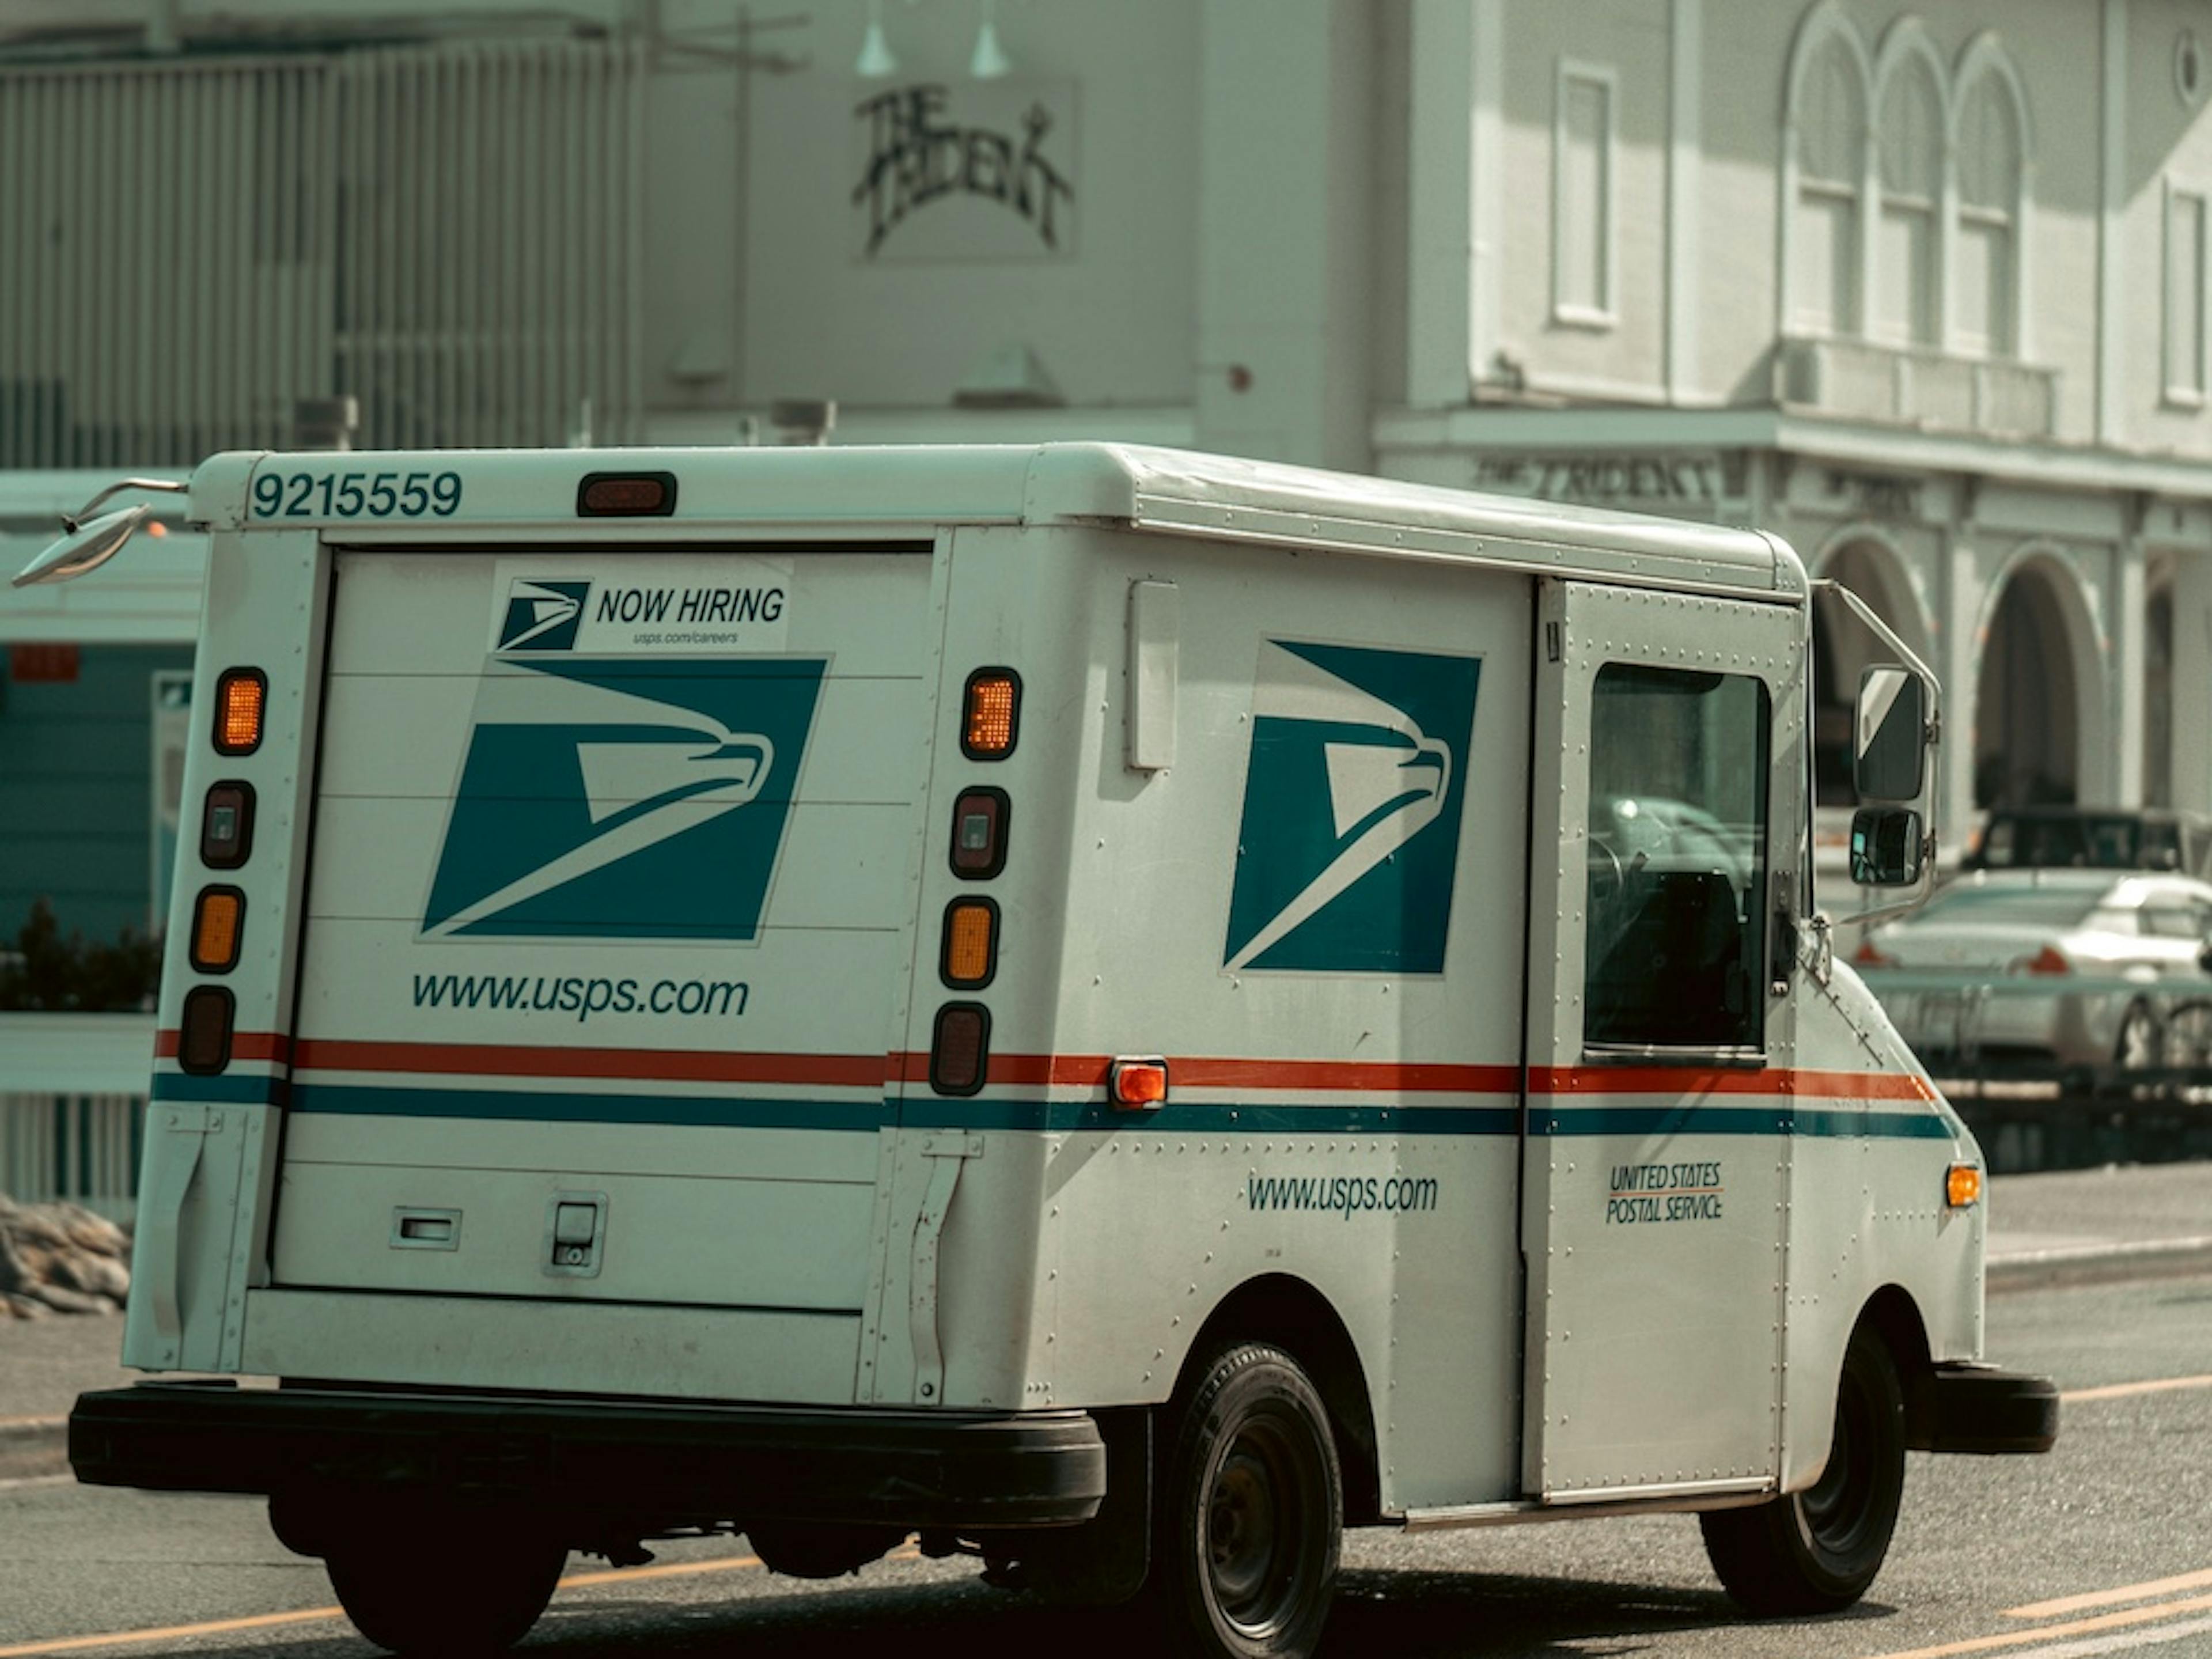 USPS delivery truck on the road